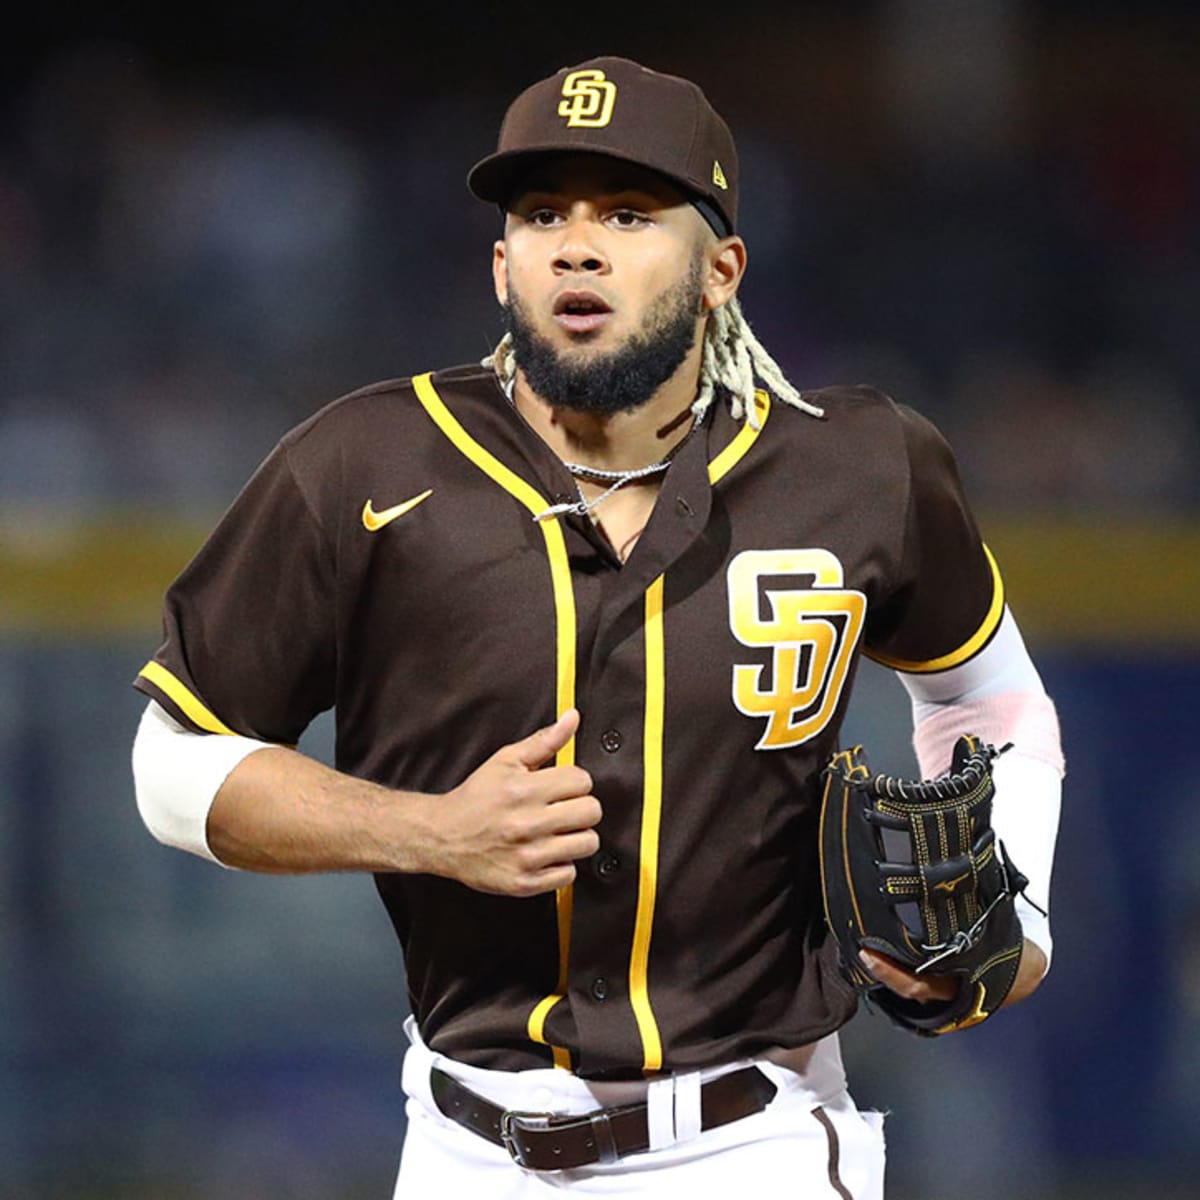 Padres season preview: Tatis headlines exciting young core - Sports  Illustrated